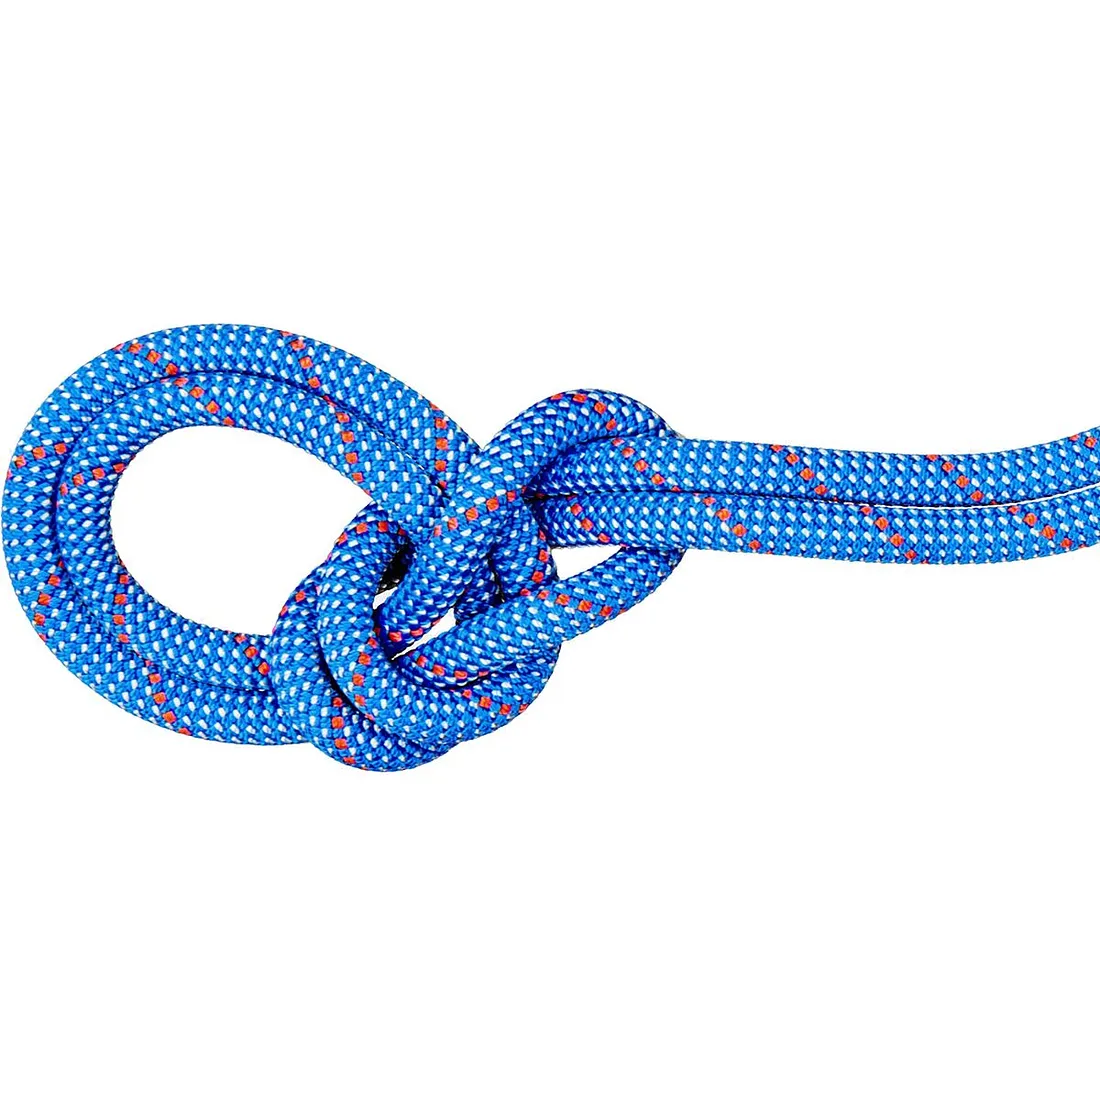 recycled climbing rope belt - Flyrooster, Crazy blue